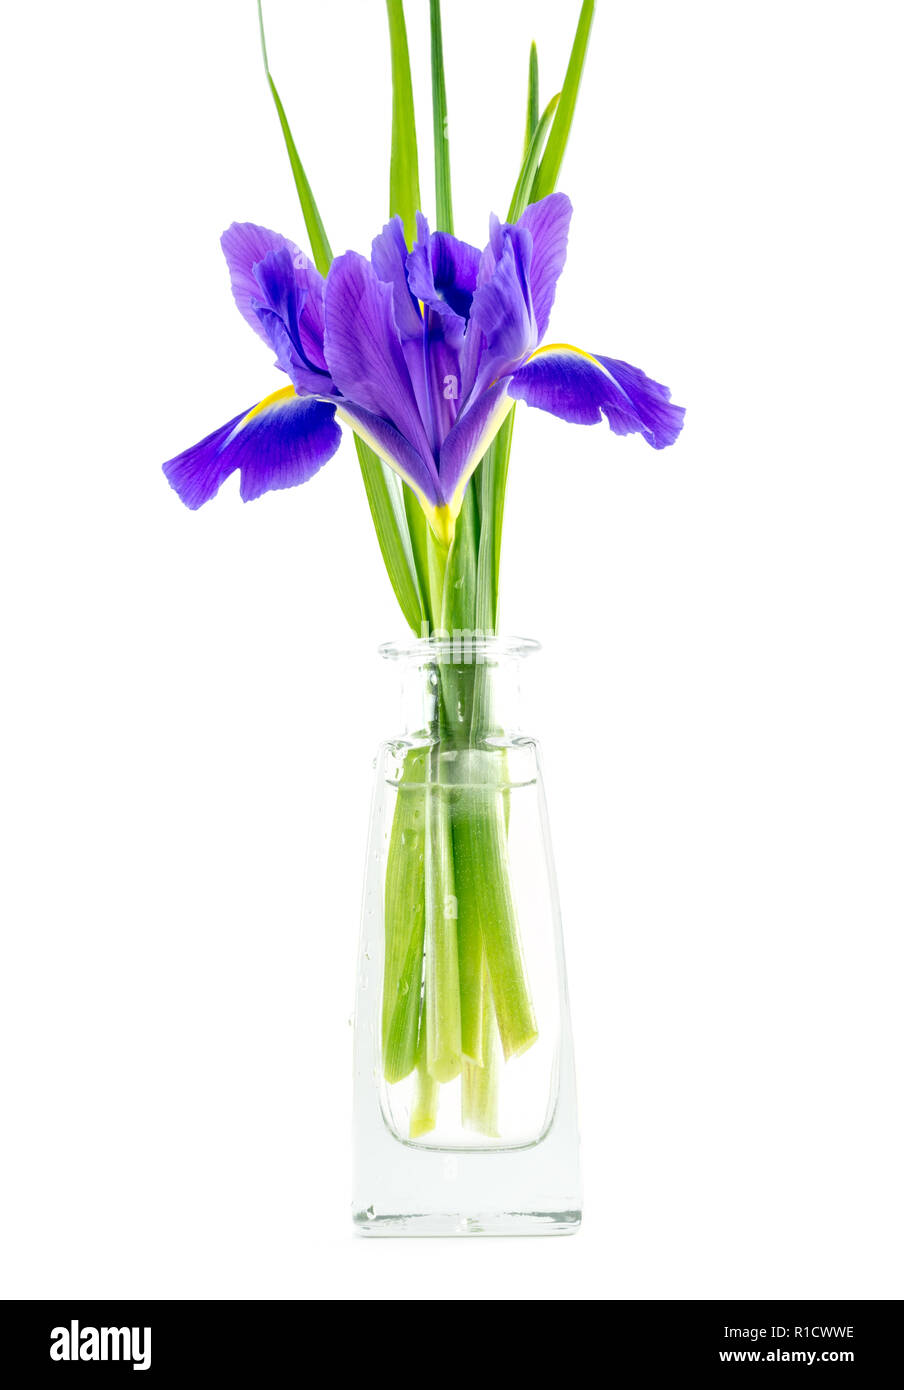 flowers blue purple irises with leaves in a glass vase isolated on white background Stock Photo